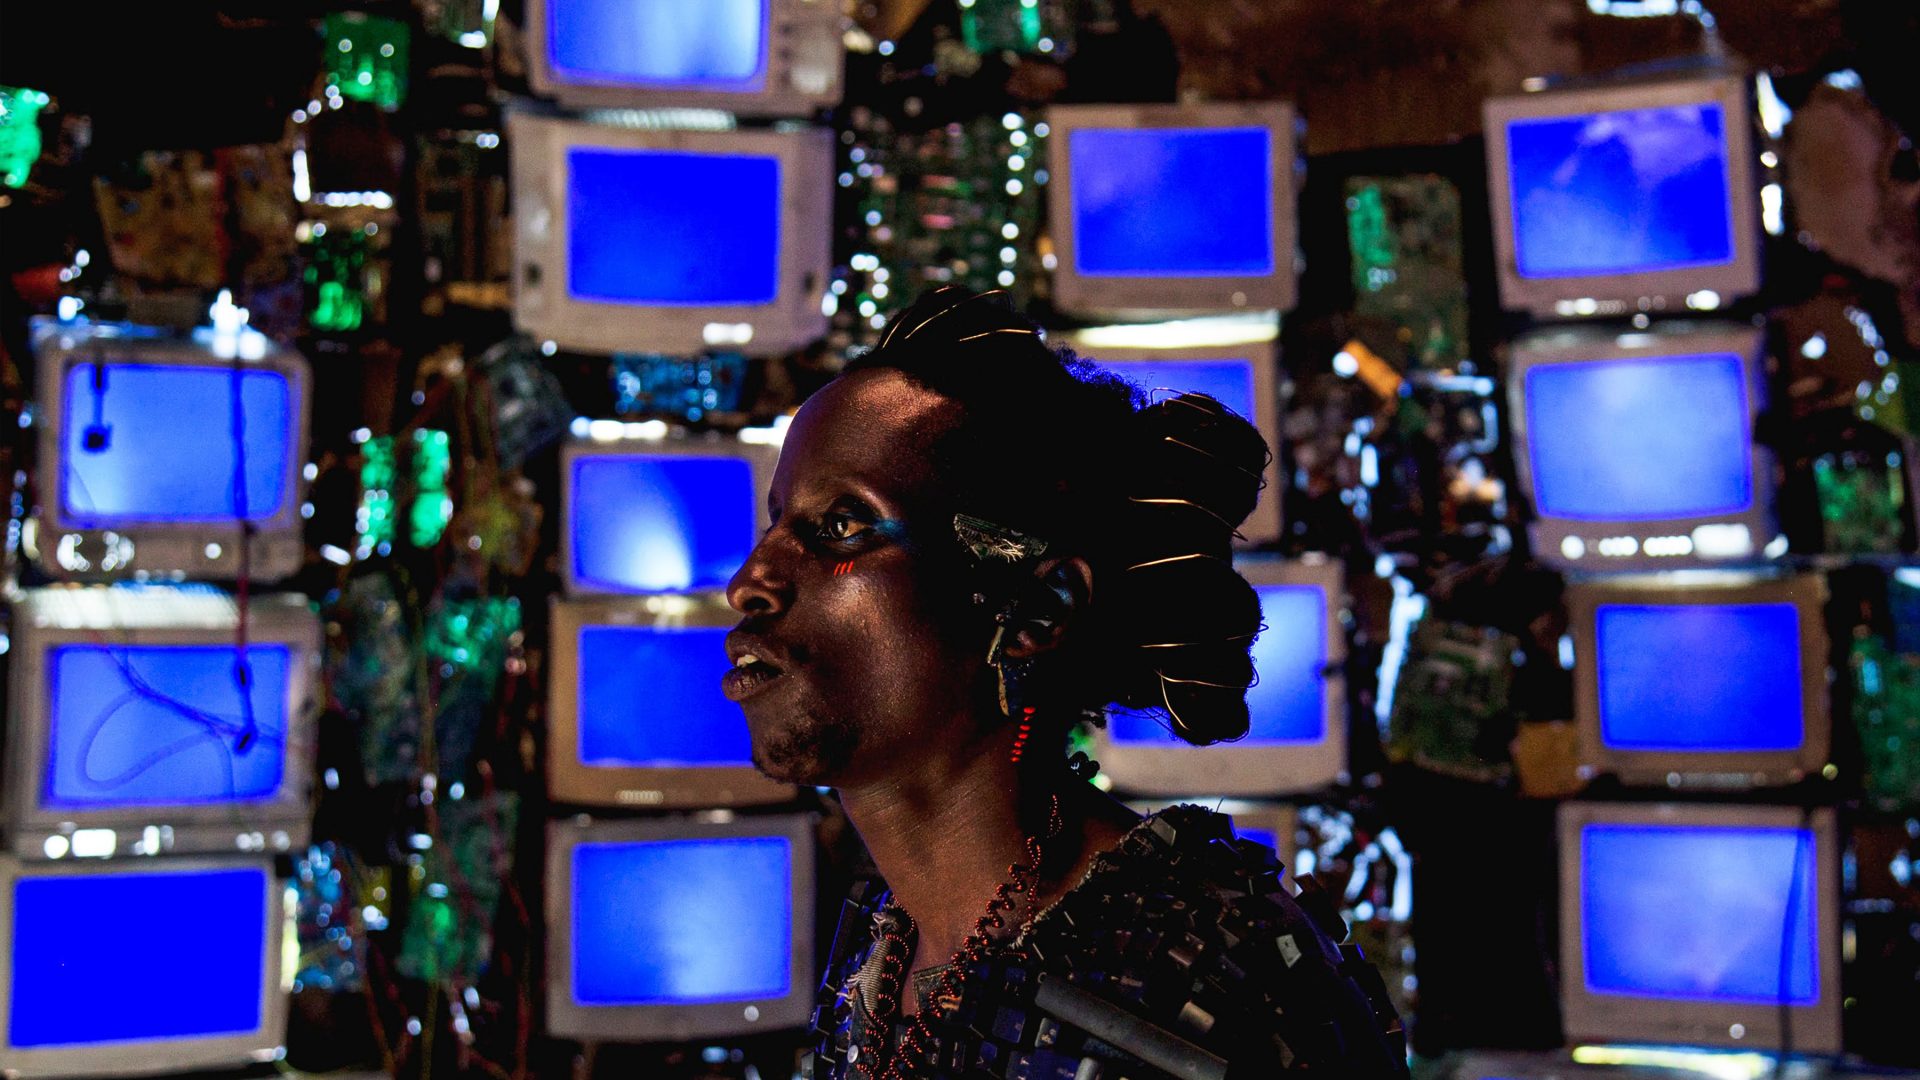 a still of a Rwandan person wearing Afrofuturist clothing in front of TV screens in Neptune Frost